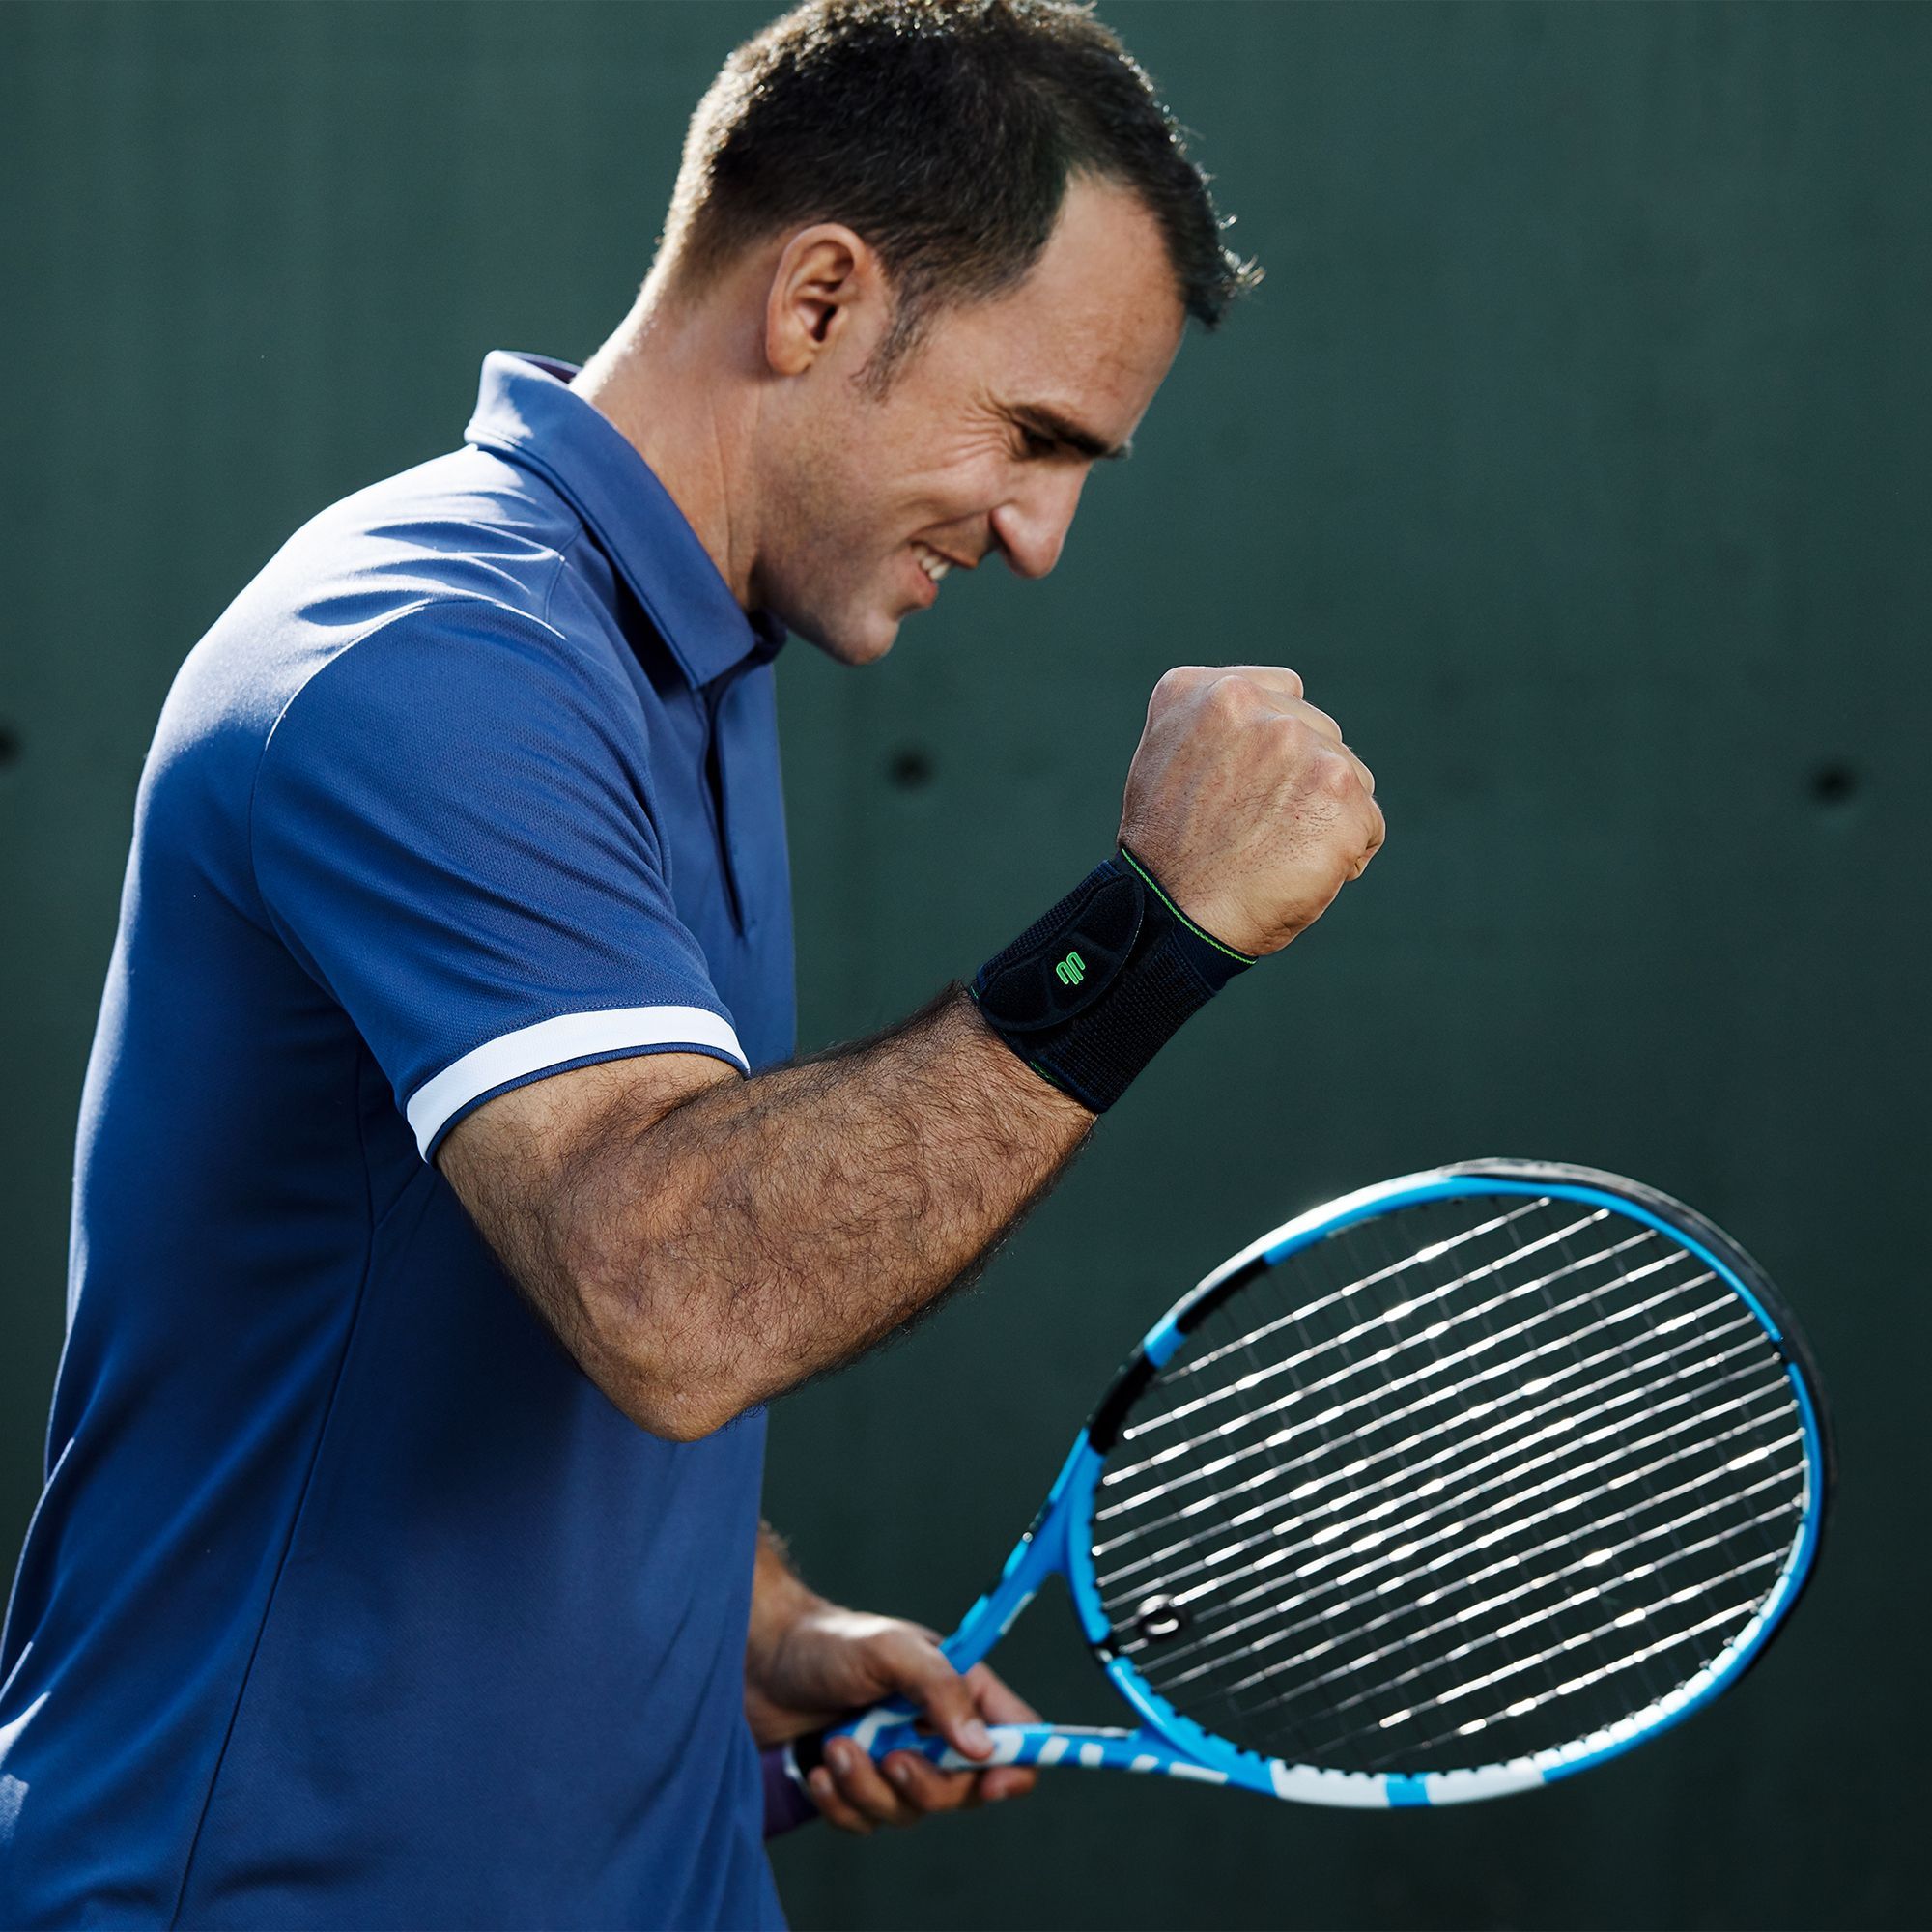 Tennis player in a winning pose with wrist bandage on the right wrist